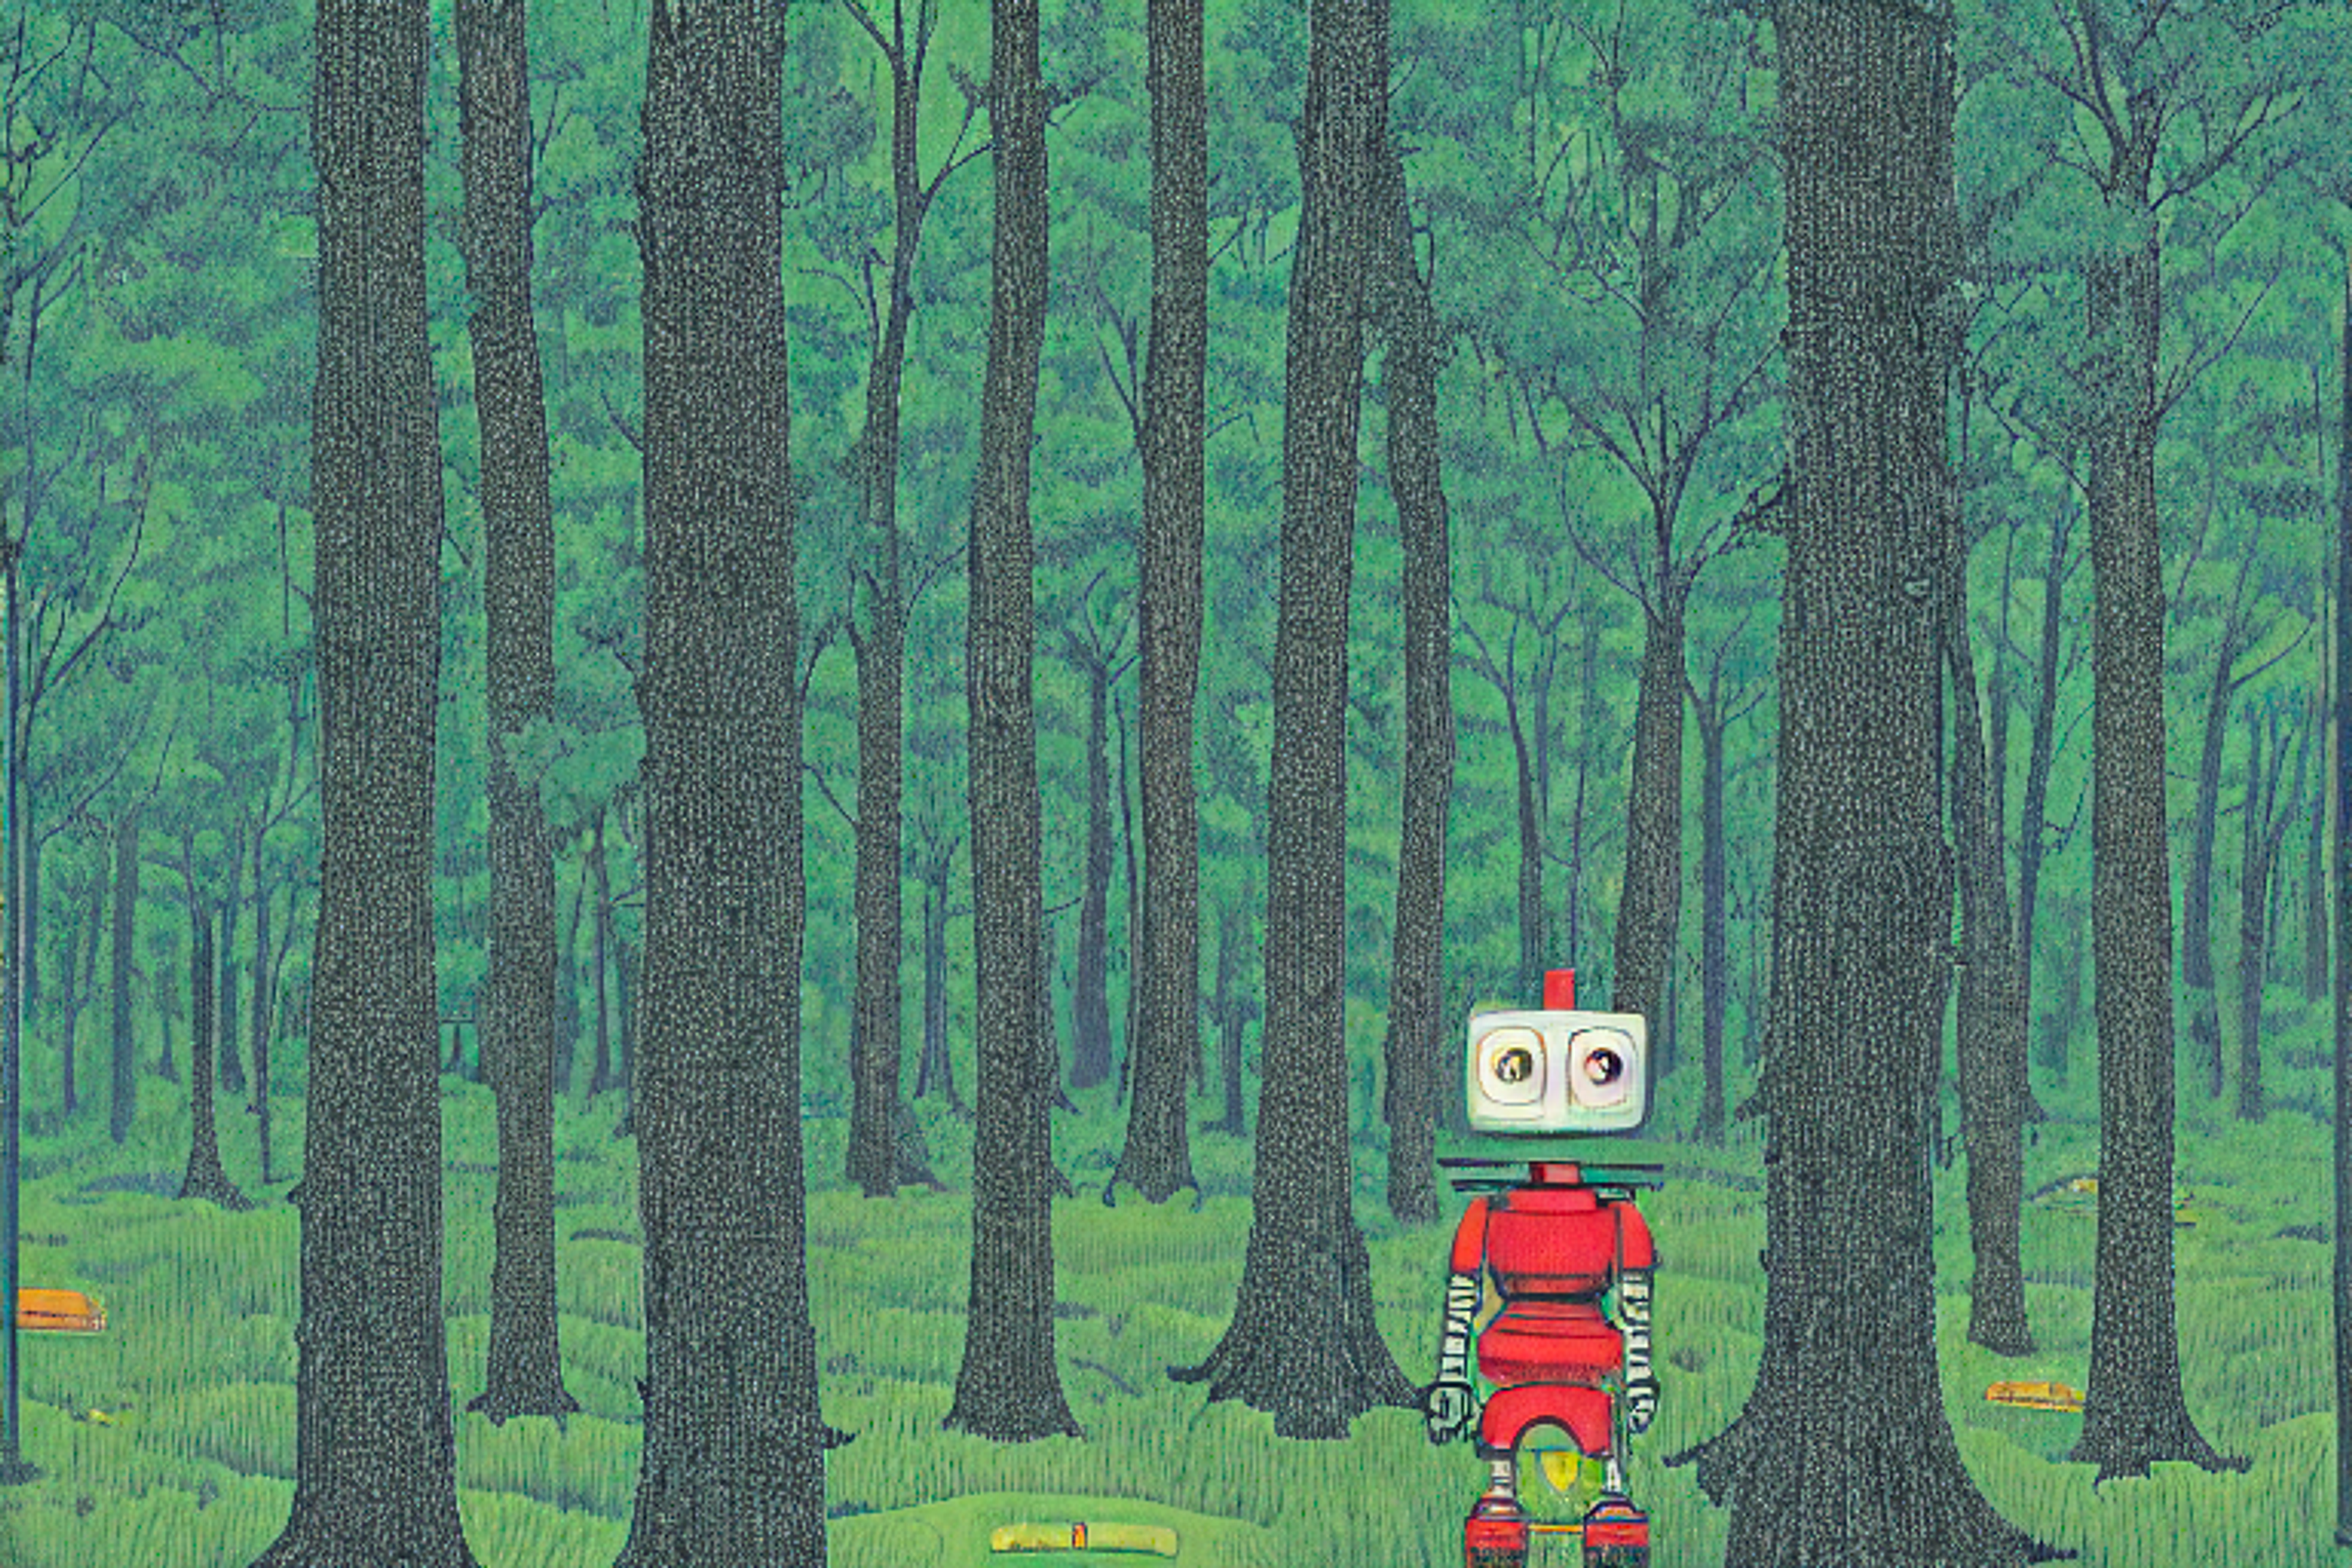 An illustration of a robot standing amongst a forest of tall trees. The robot looks lost and confused. Don't worry, robot. We're here to help you.